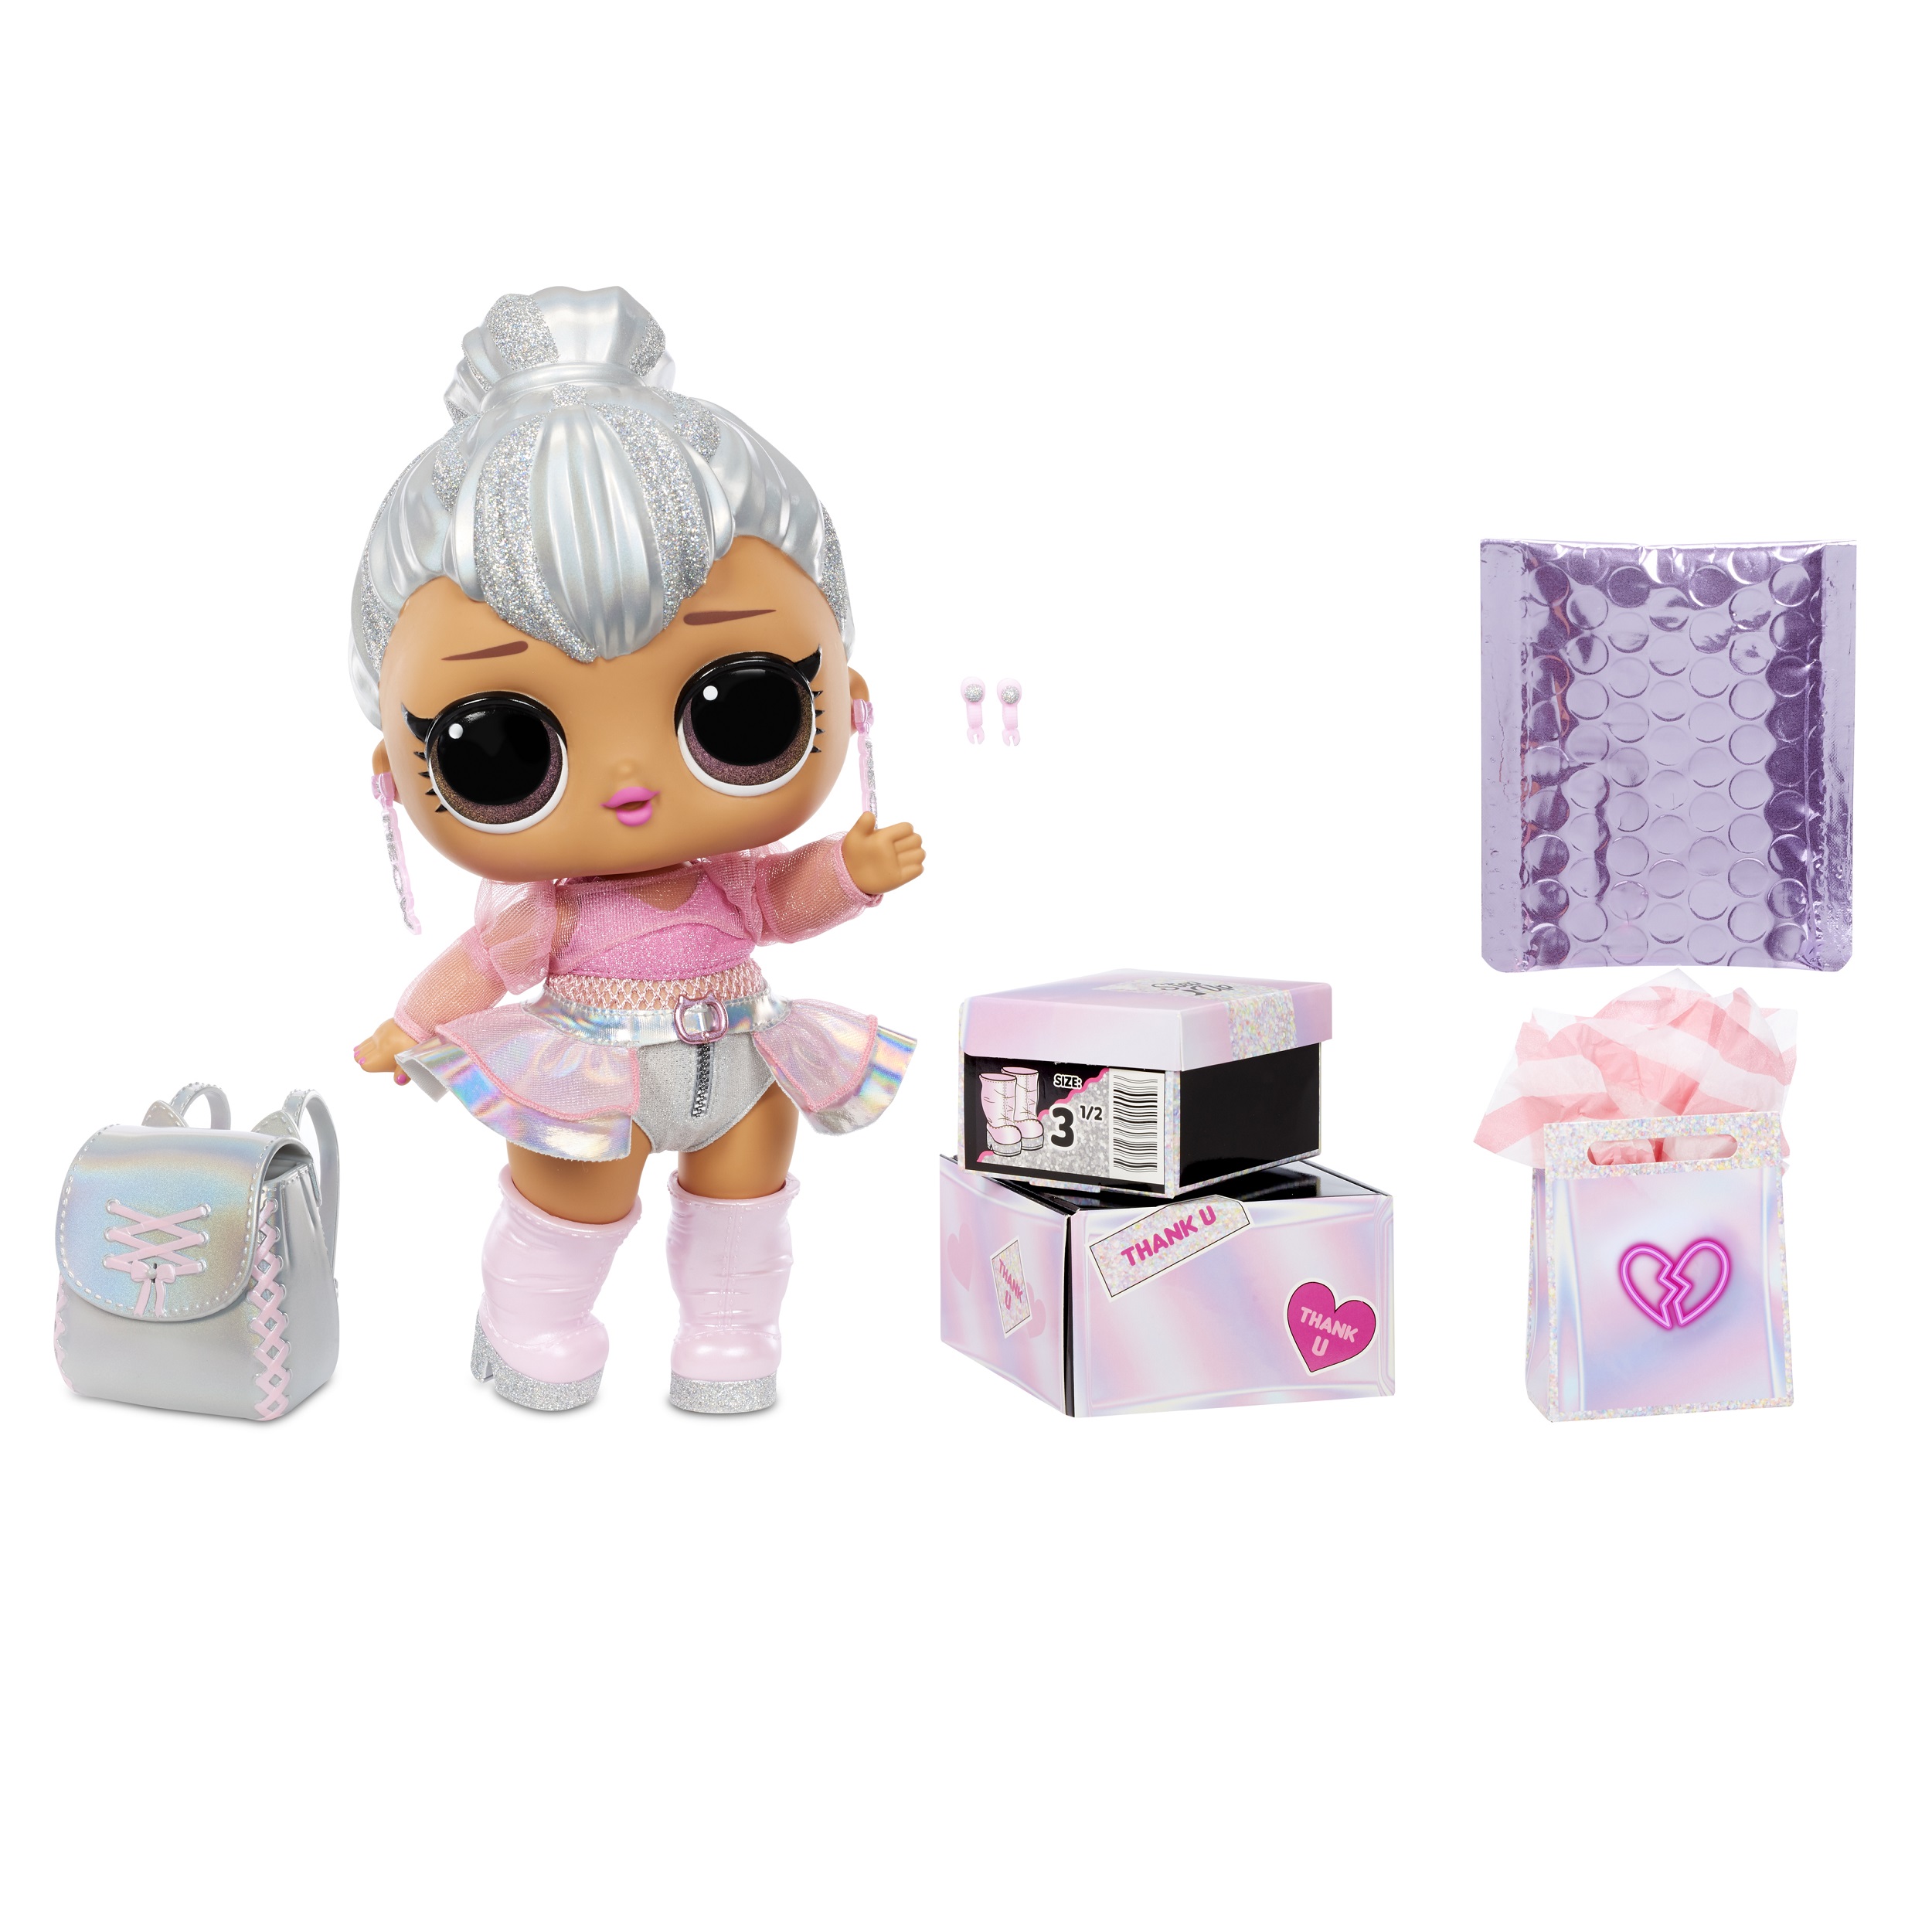 LOL Surprise Big B.B. (Big Baby) Kitty Queen – 12" Large Doll, Unbox Fashions, Shoes, Accessories, Includes Playset Desk, Chair and Backdrop - image 1 of 7